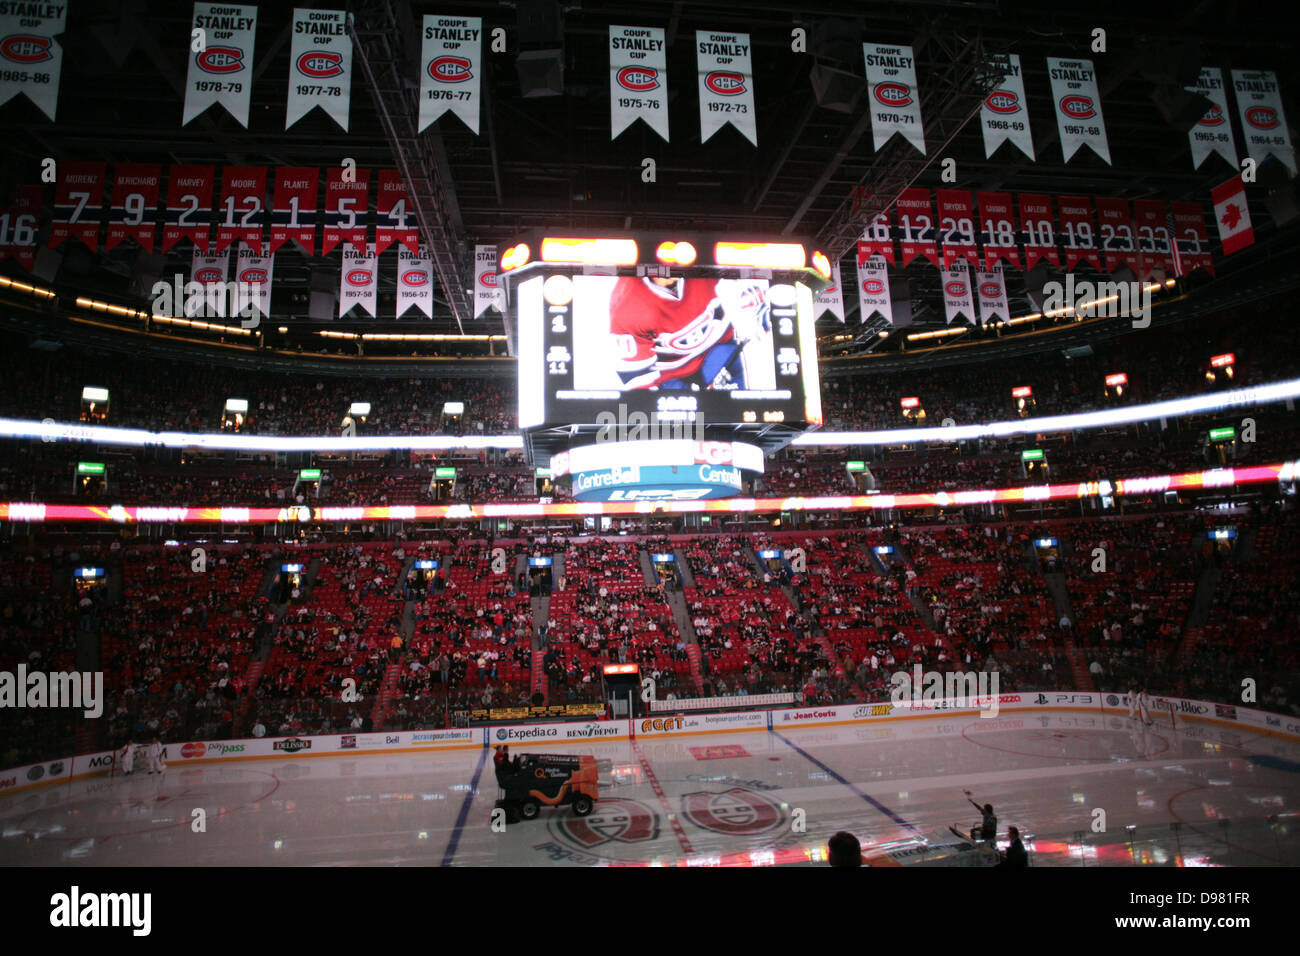 Intermission at a Montreal Canadiens Hockey game inside the Bell Centre. Stock Photo